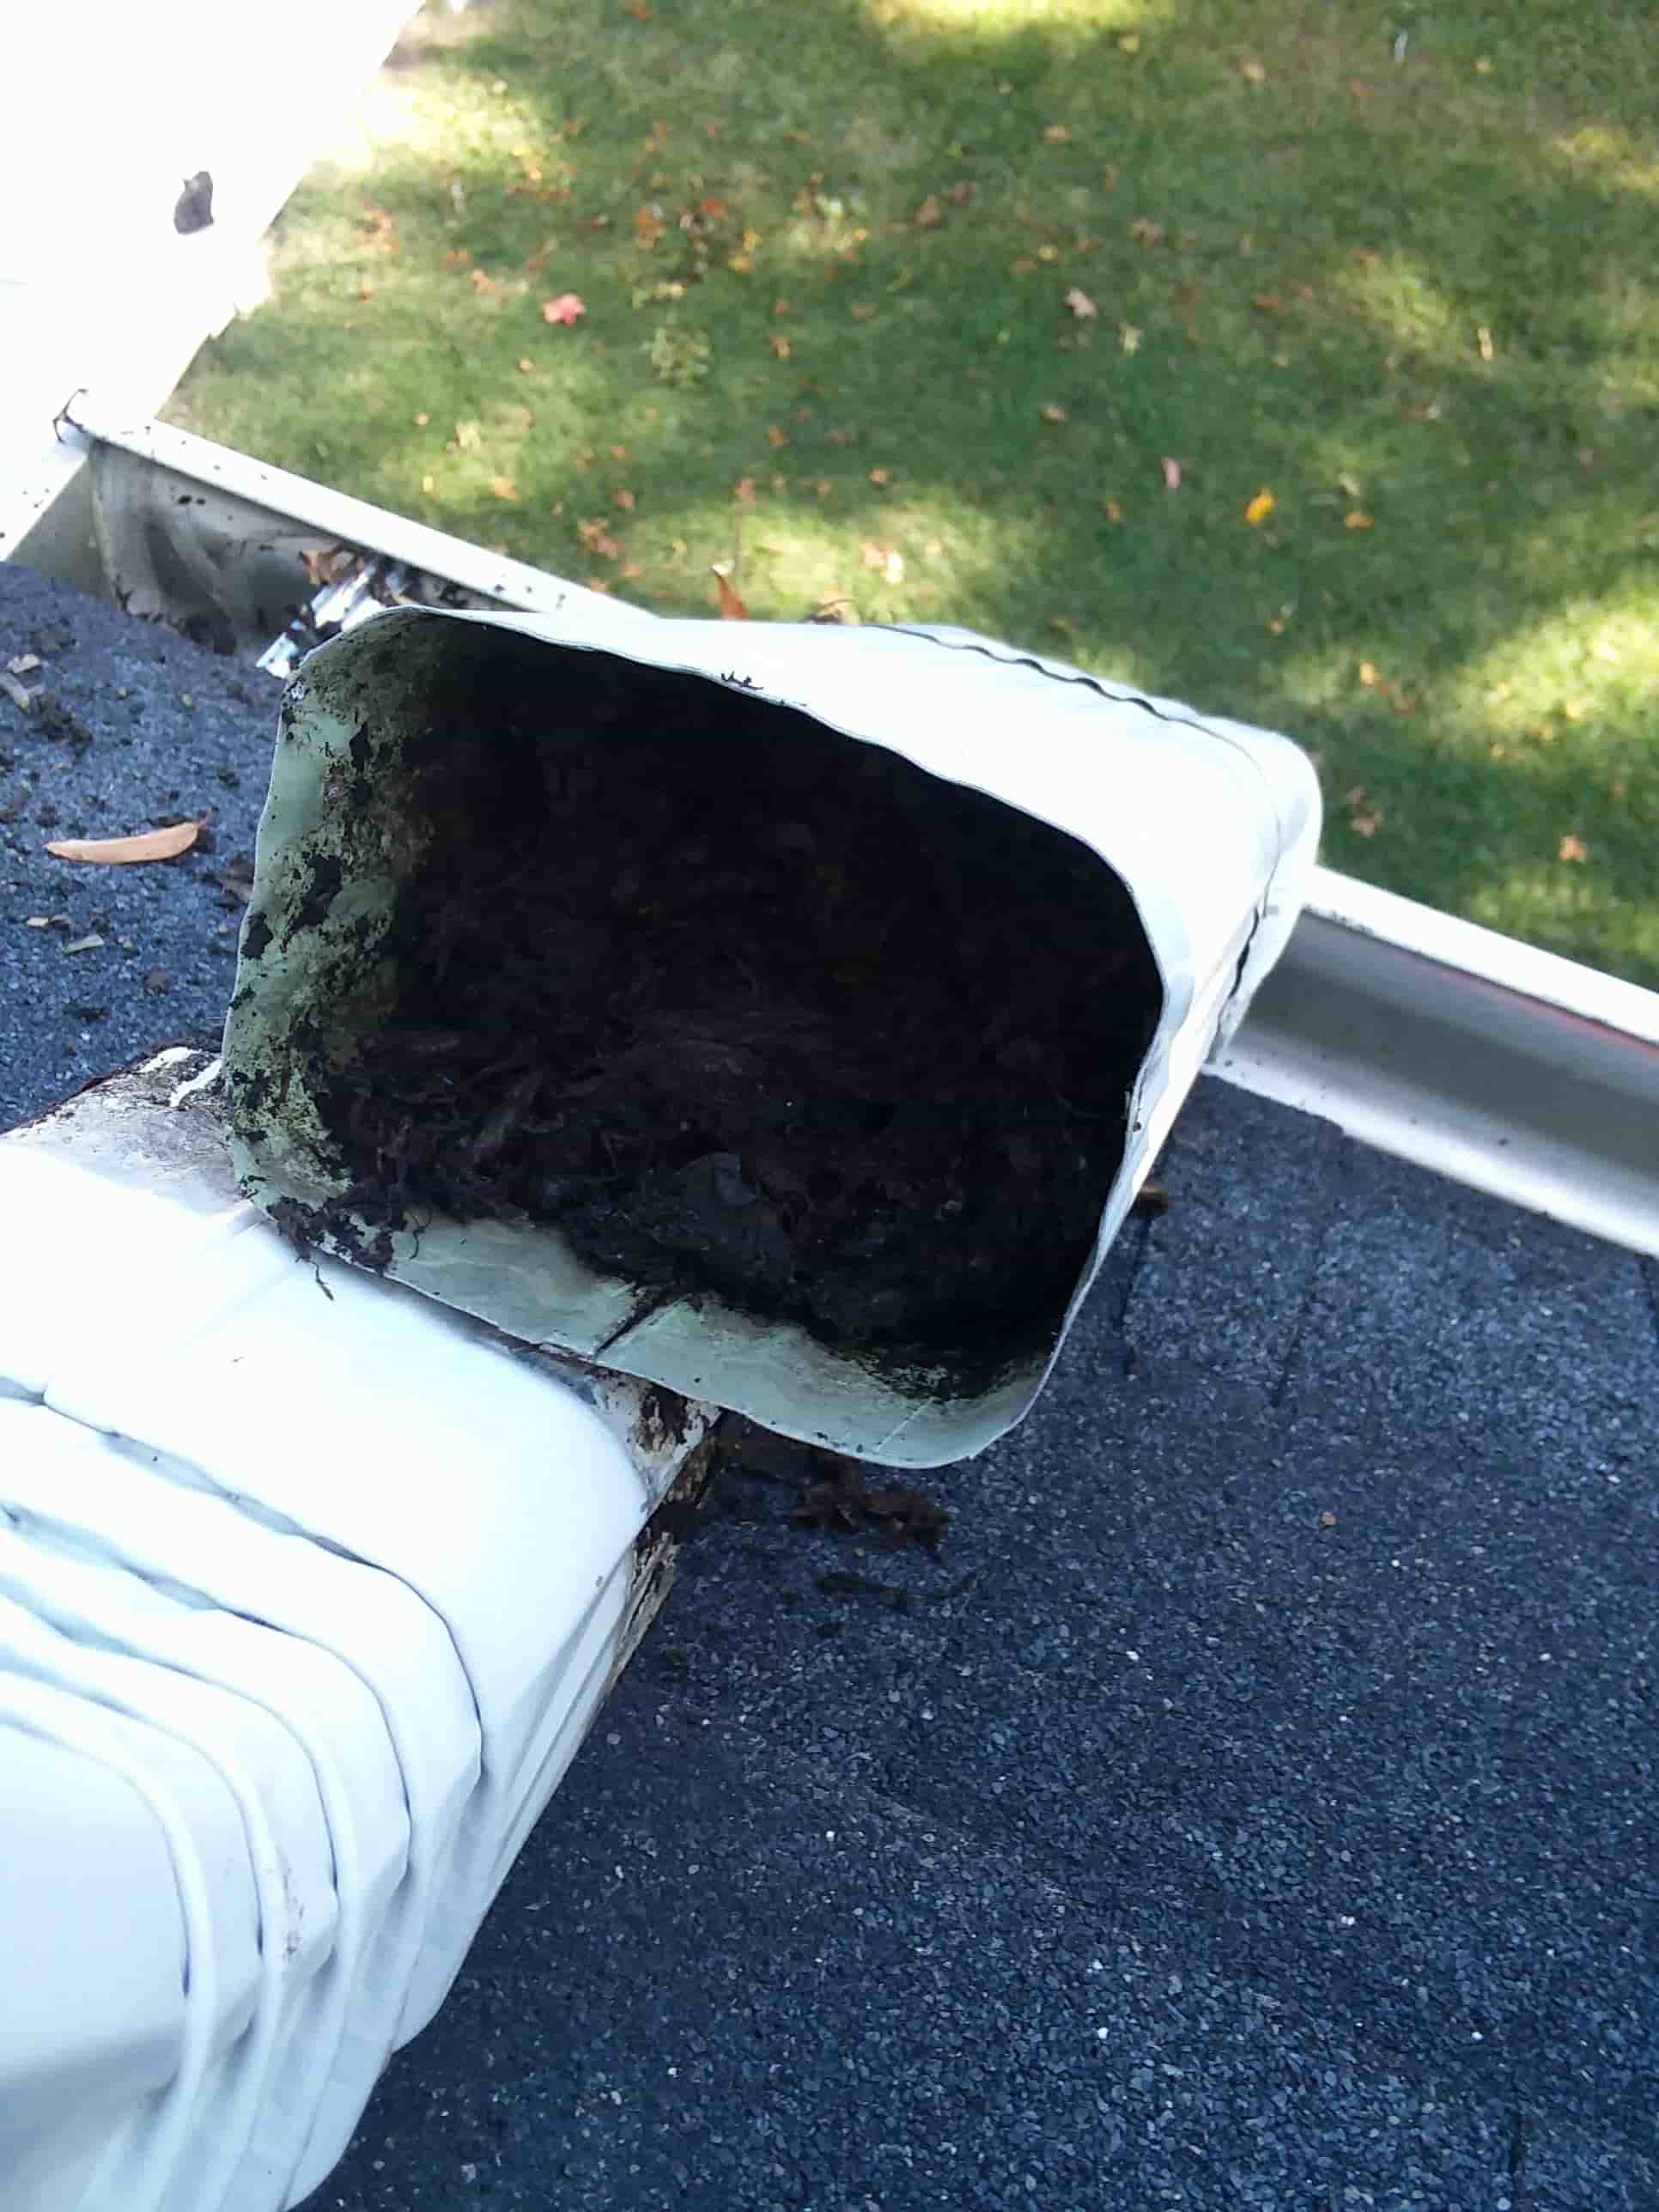 how to clean your gutter